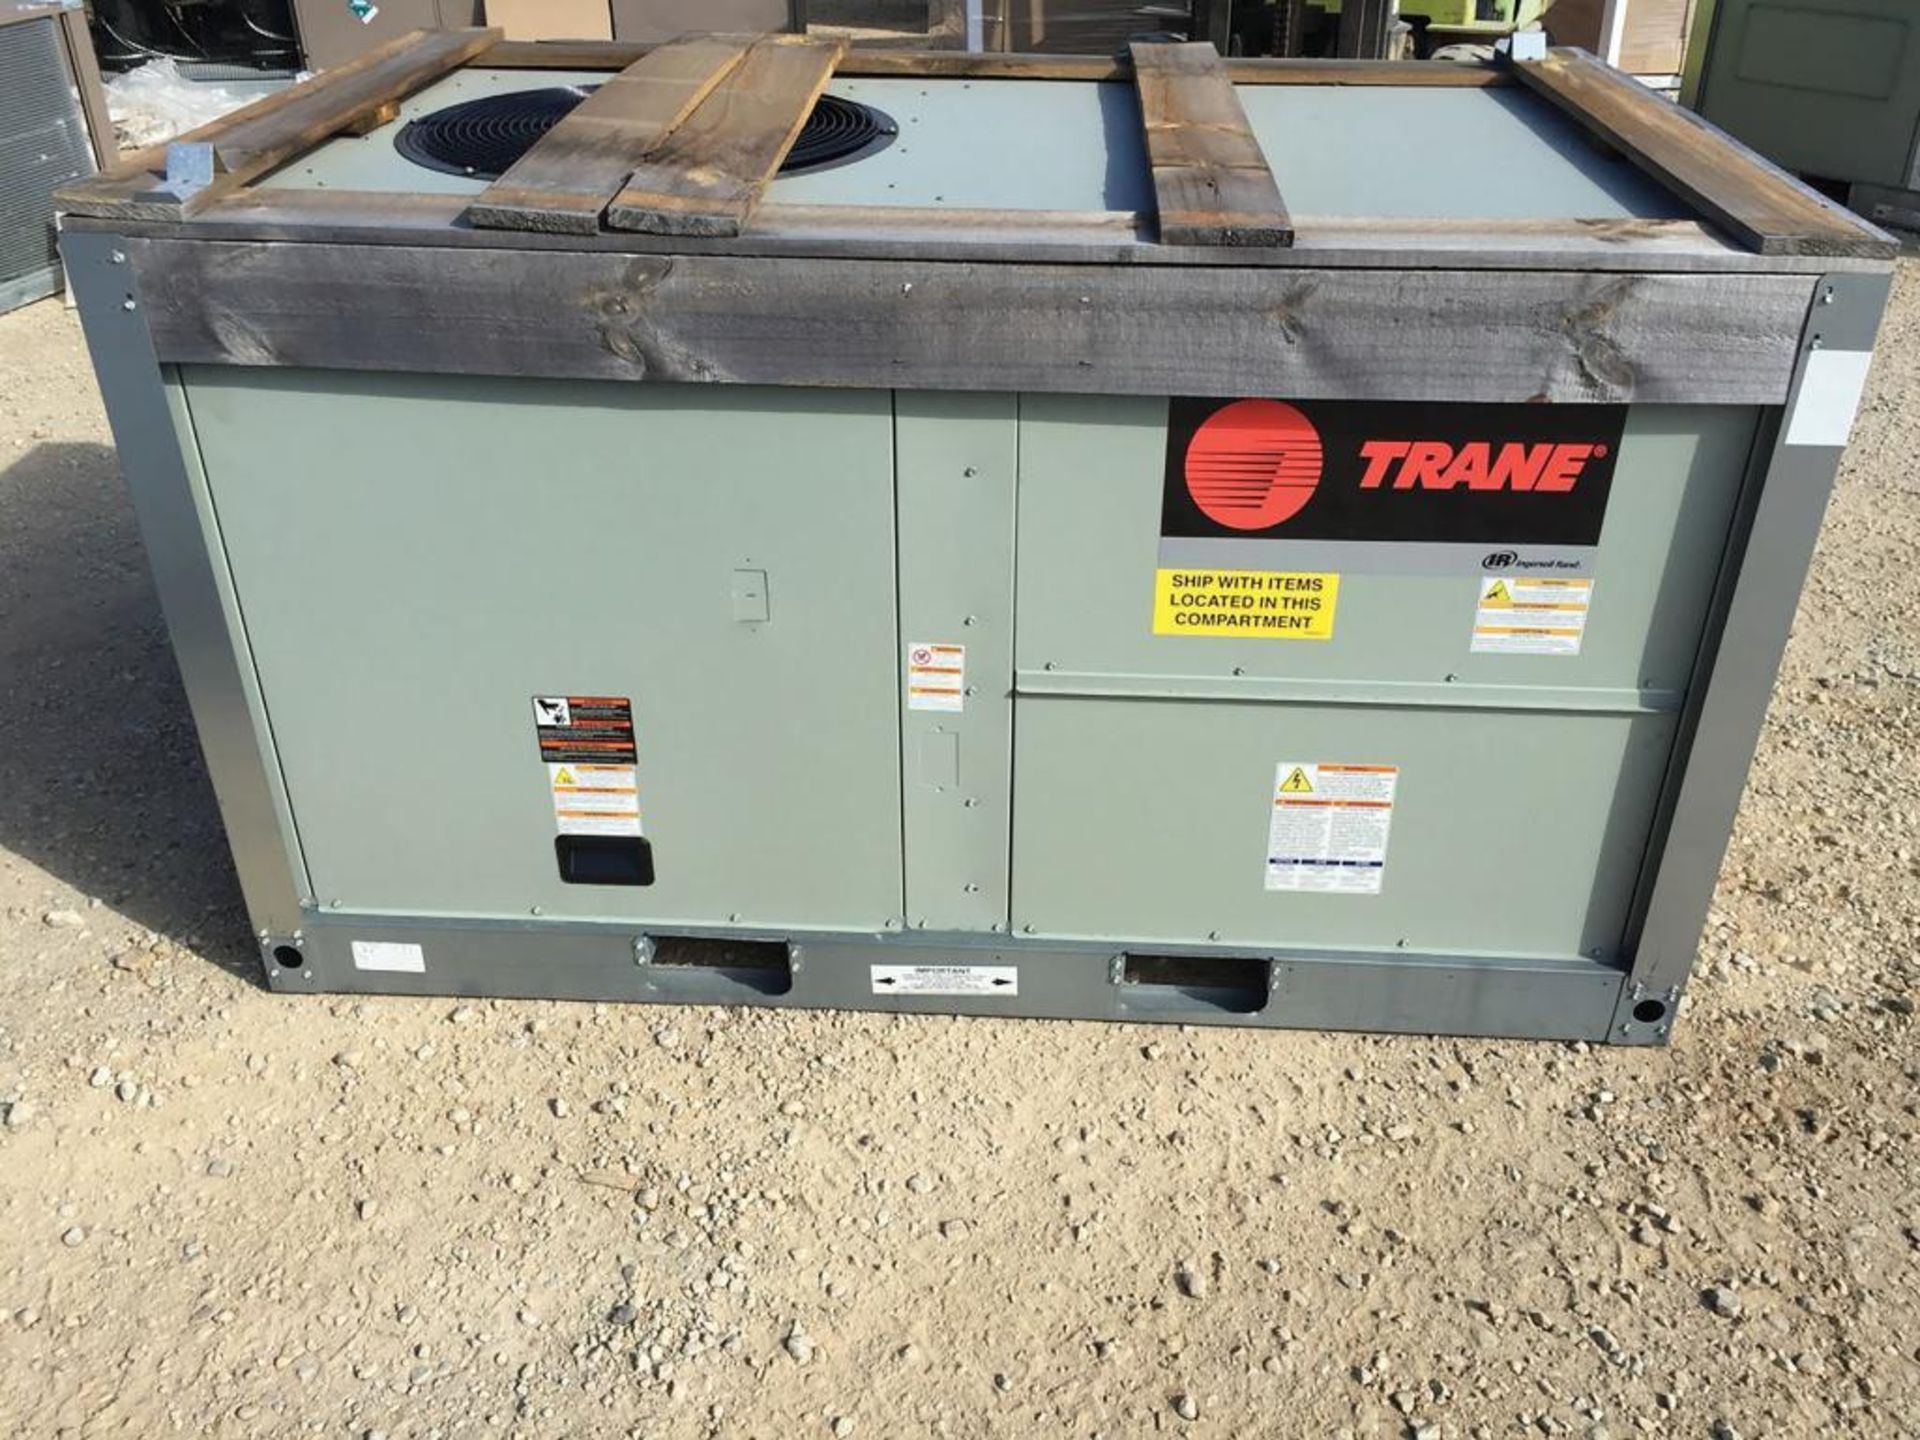 (1) Trane 3-Ton Convertible Packaged Air Conditioner Unit, Volts: 460, Hertz: 60, Phase: 3, Rla: 5.8